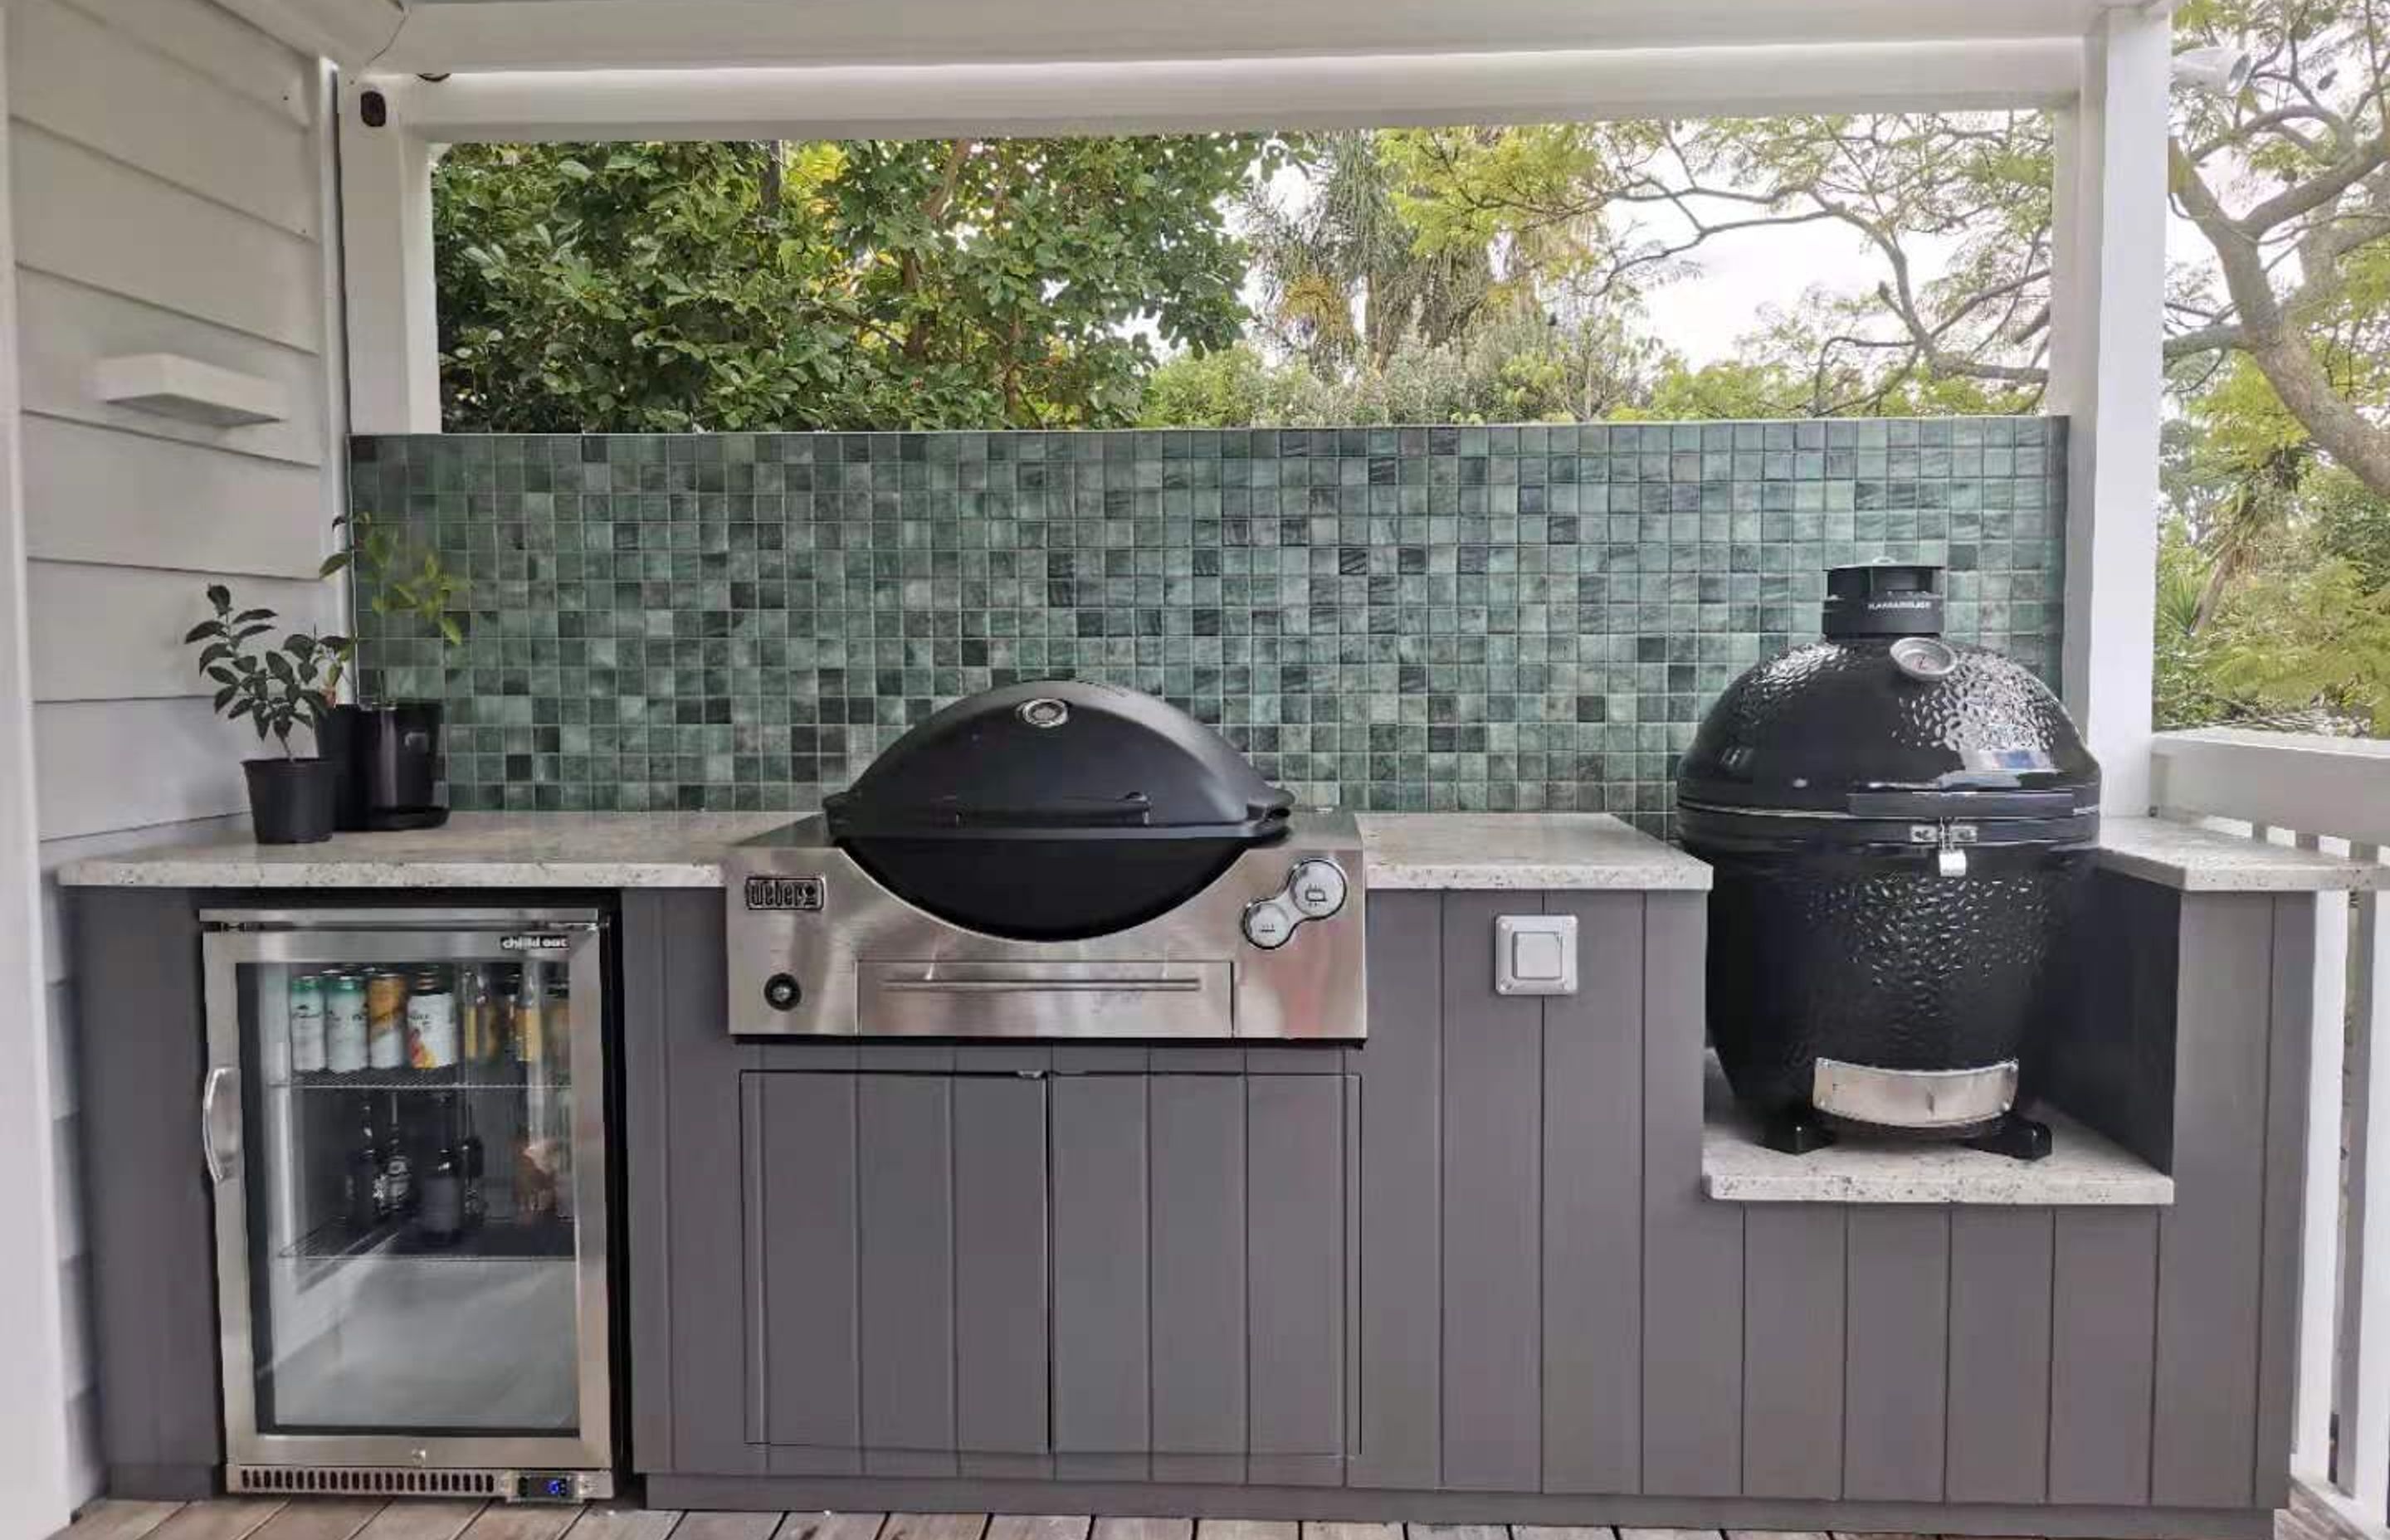 Incorporate a refrigerator, bbq and smoker into your outdoor kitchen for a full culinary experience.